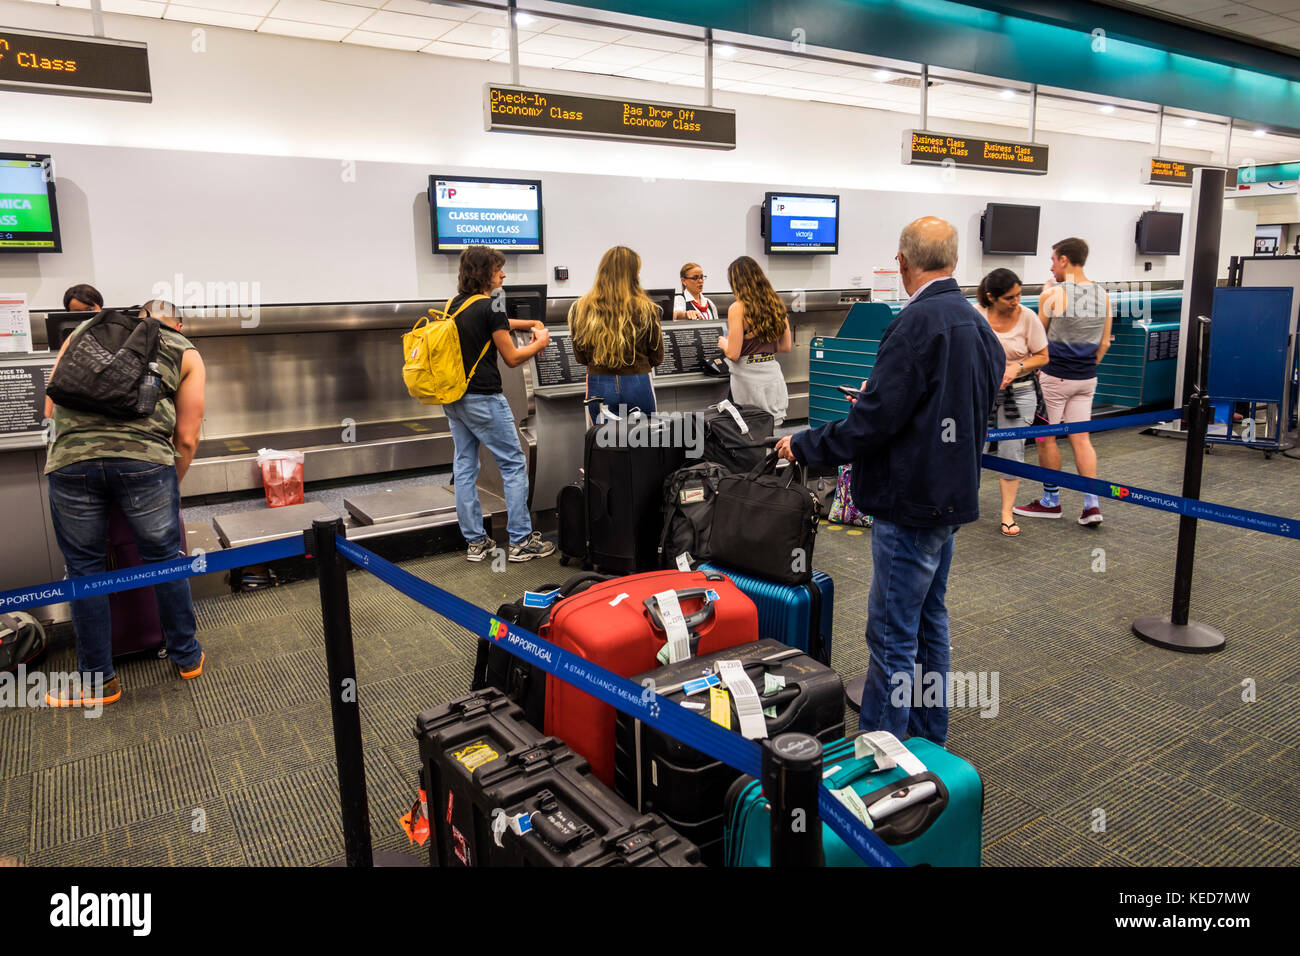 Florida,FL South,Miami,MIA,Miami International Airport,terminal,TAP Air  Portugal,airline carrier,ticket counter,luggage,check-in,line,queue,passenger  Stock Photo - Alamy